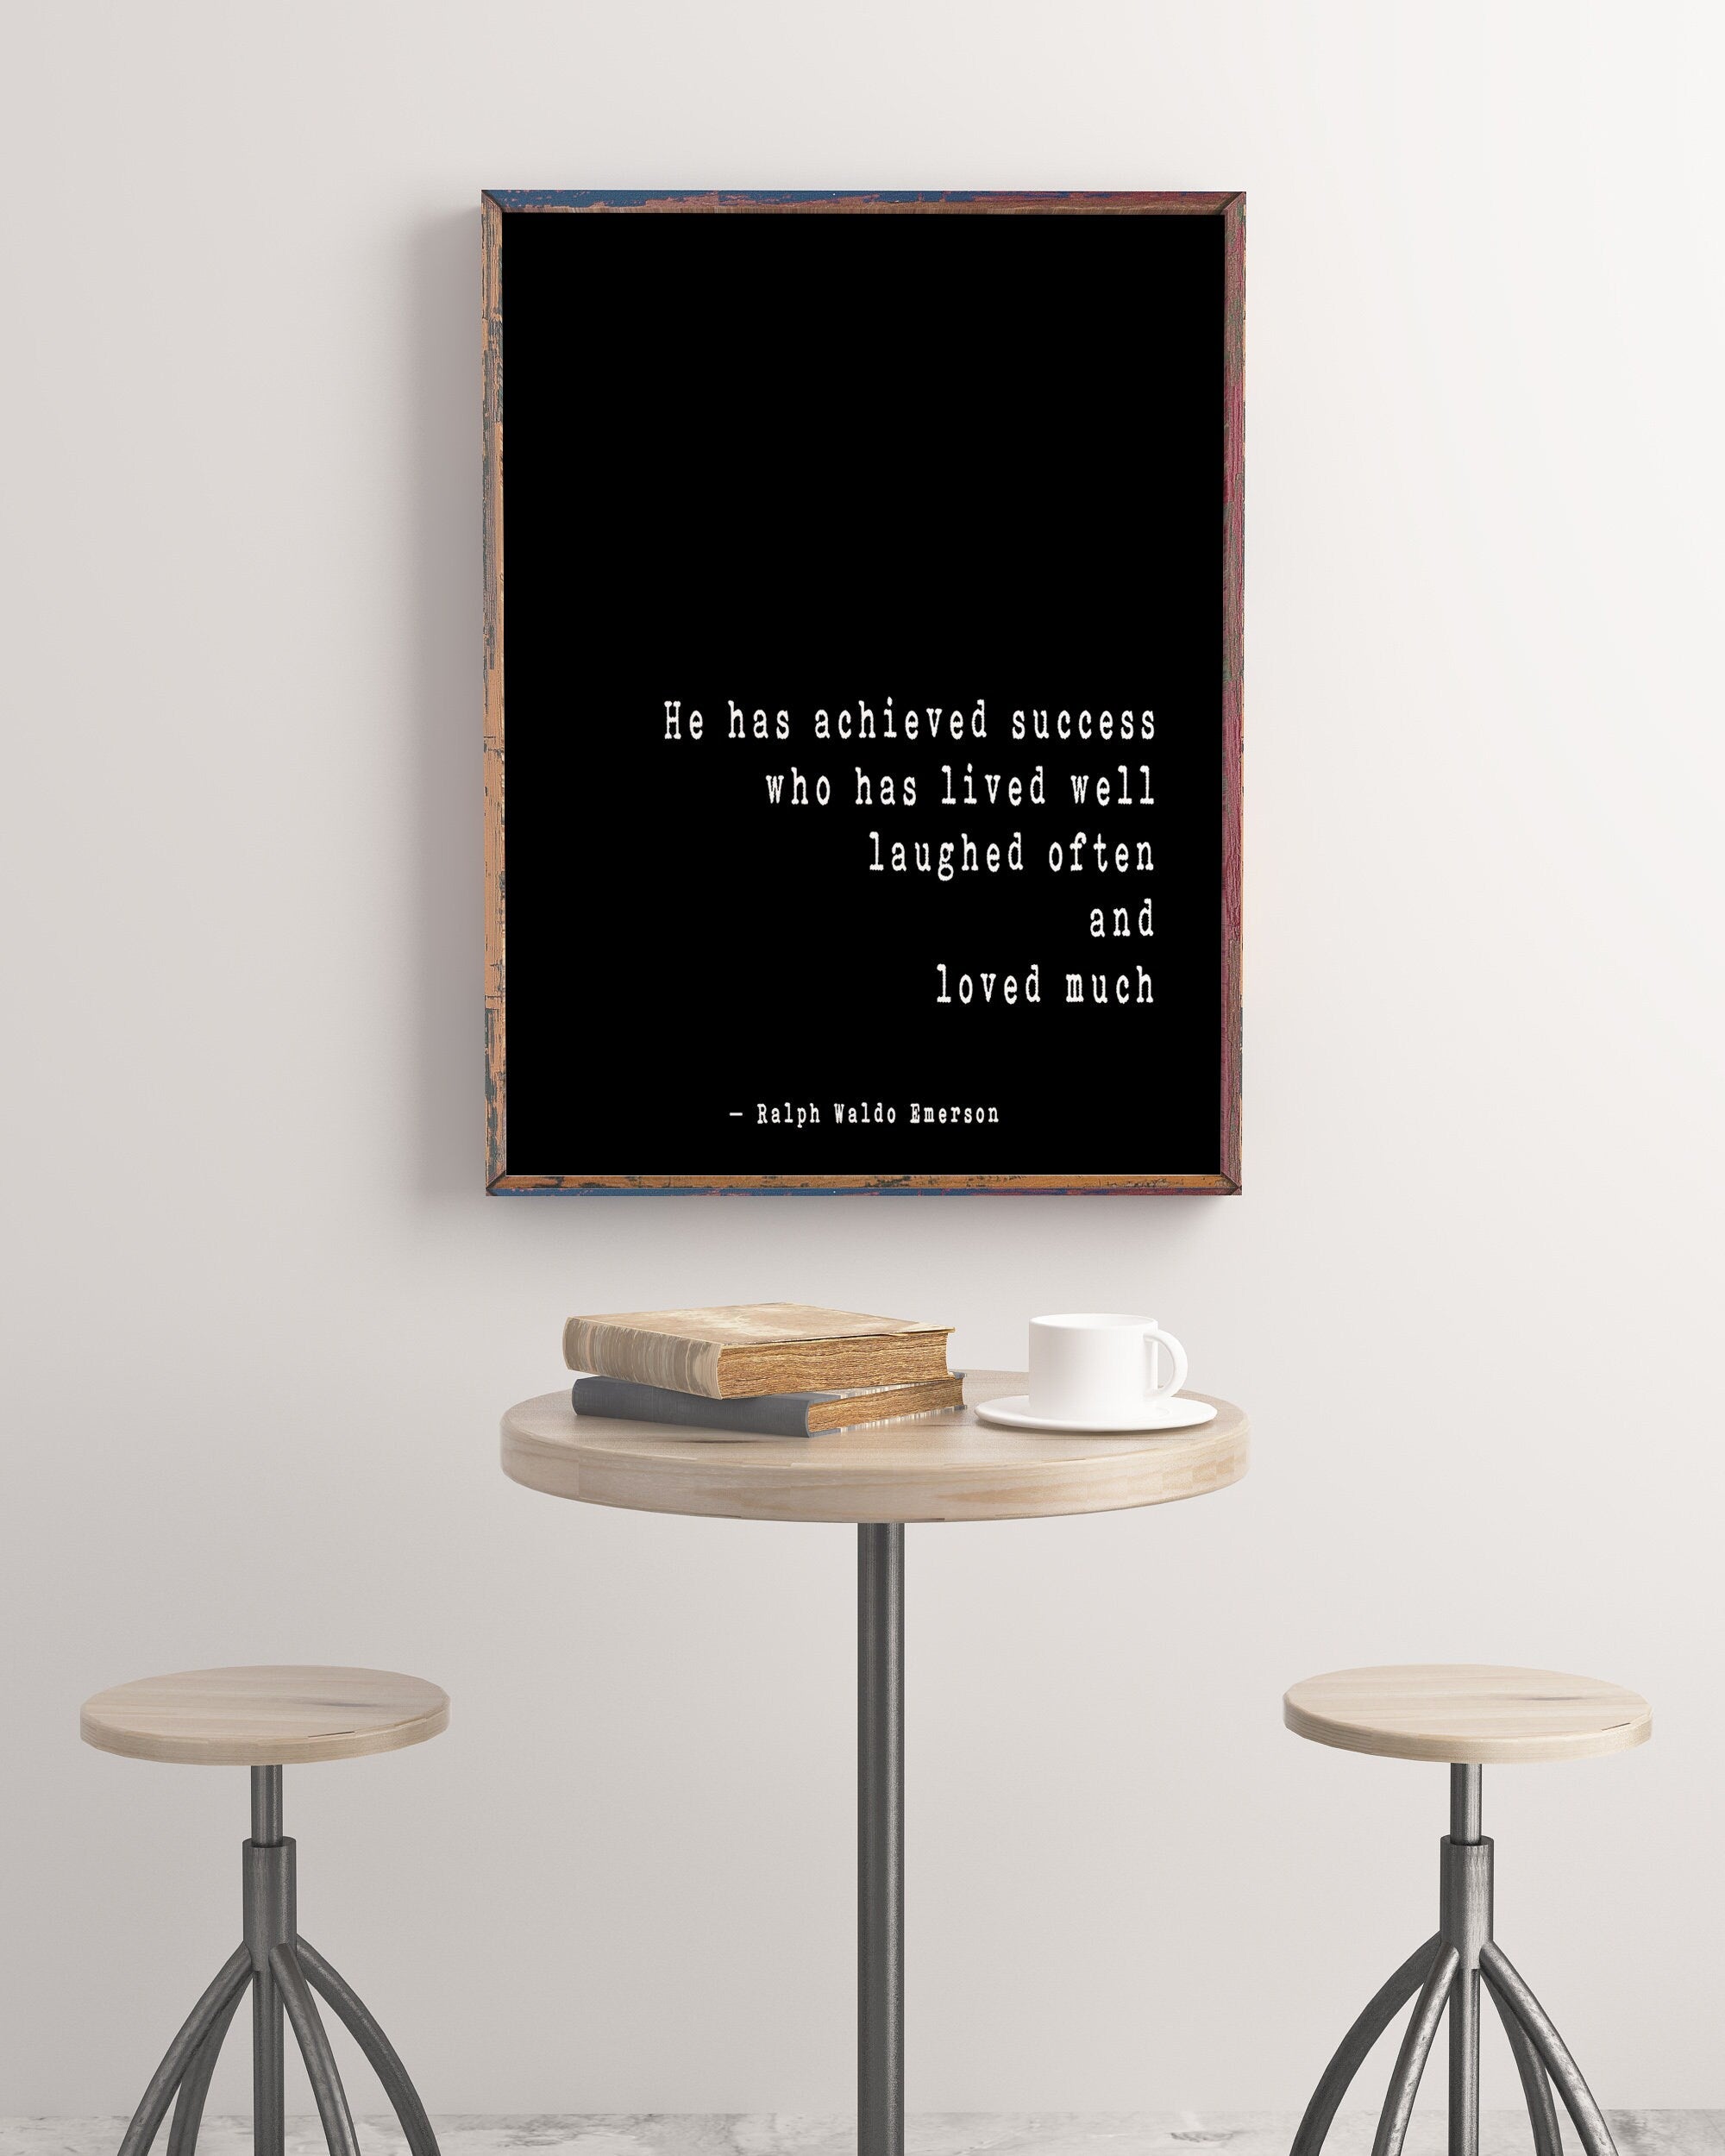 Ralph Waldo Emerson Inspirational Positive Success Quote, He Has Achieved Success Loved Laughed Art Print For Home Decor Unframed or Framed